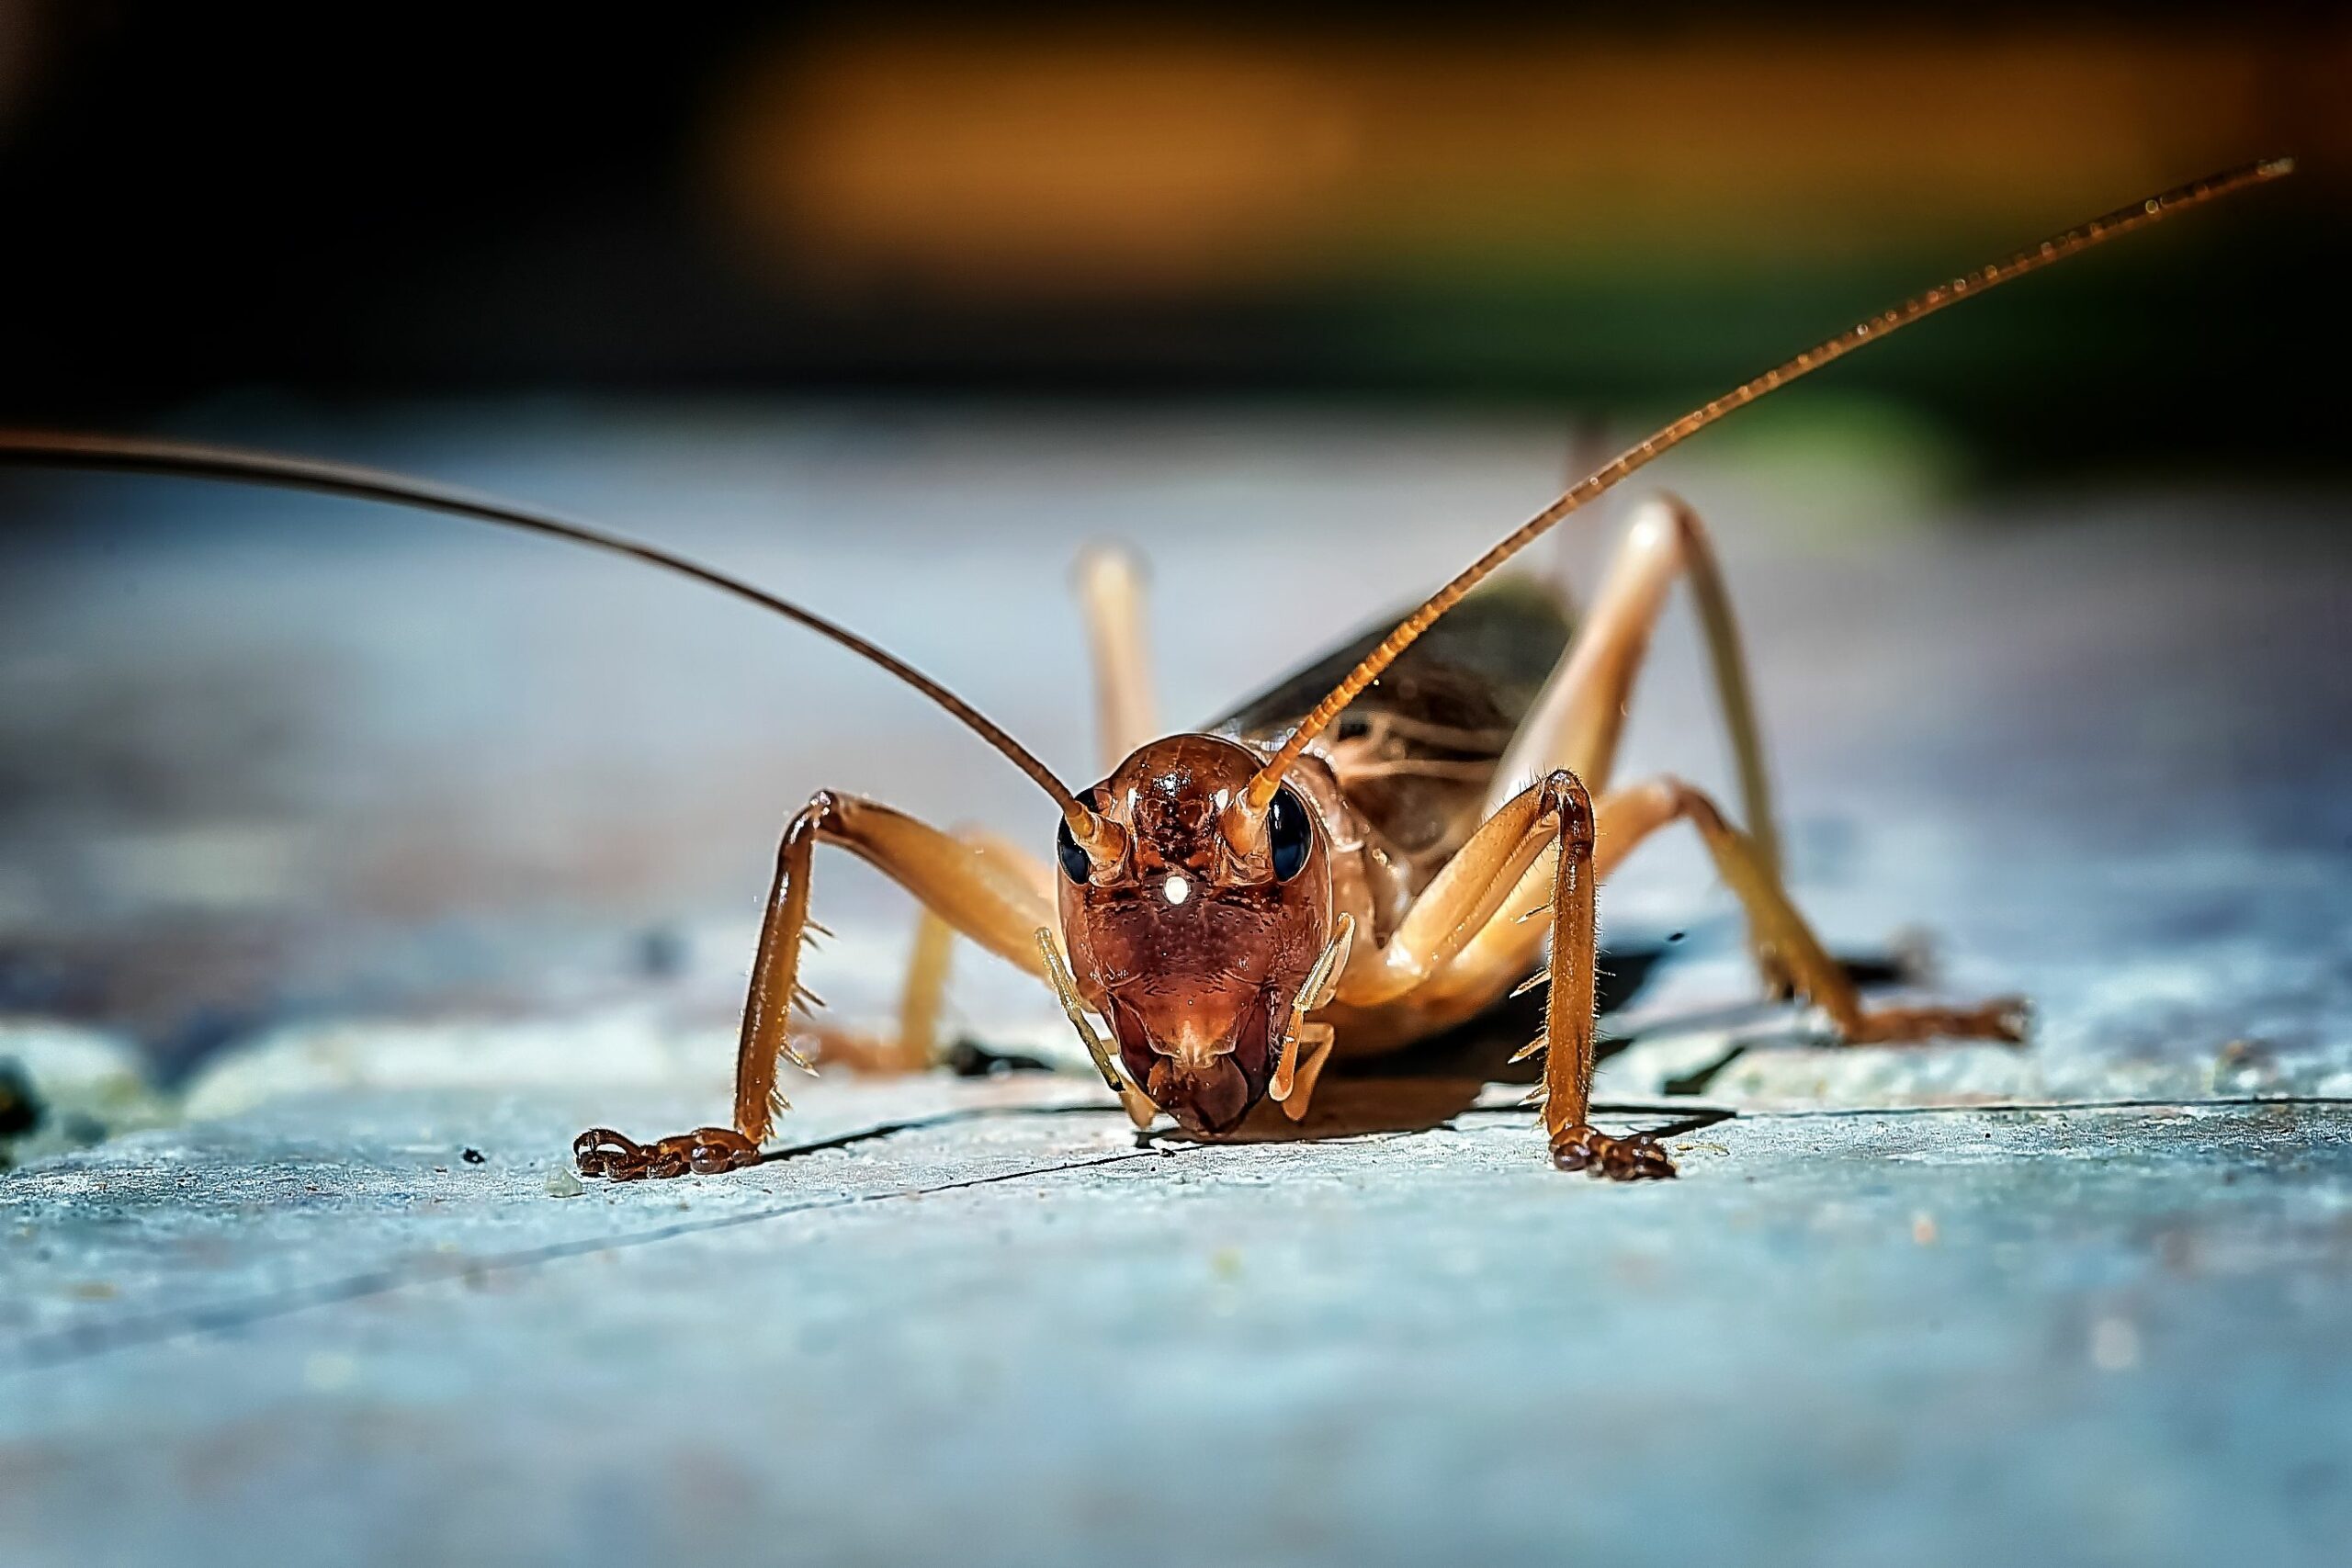 How do I get rid of crickets outside?